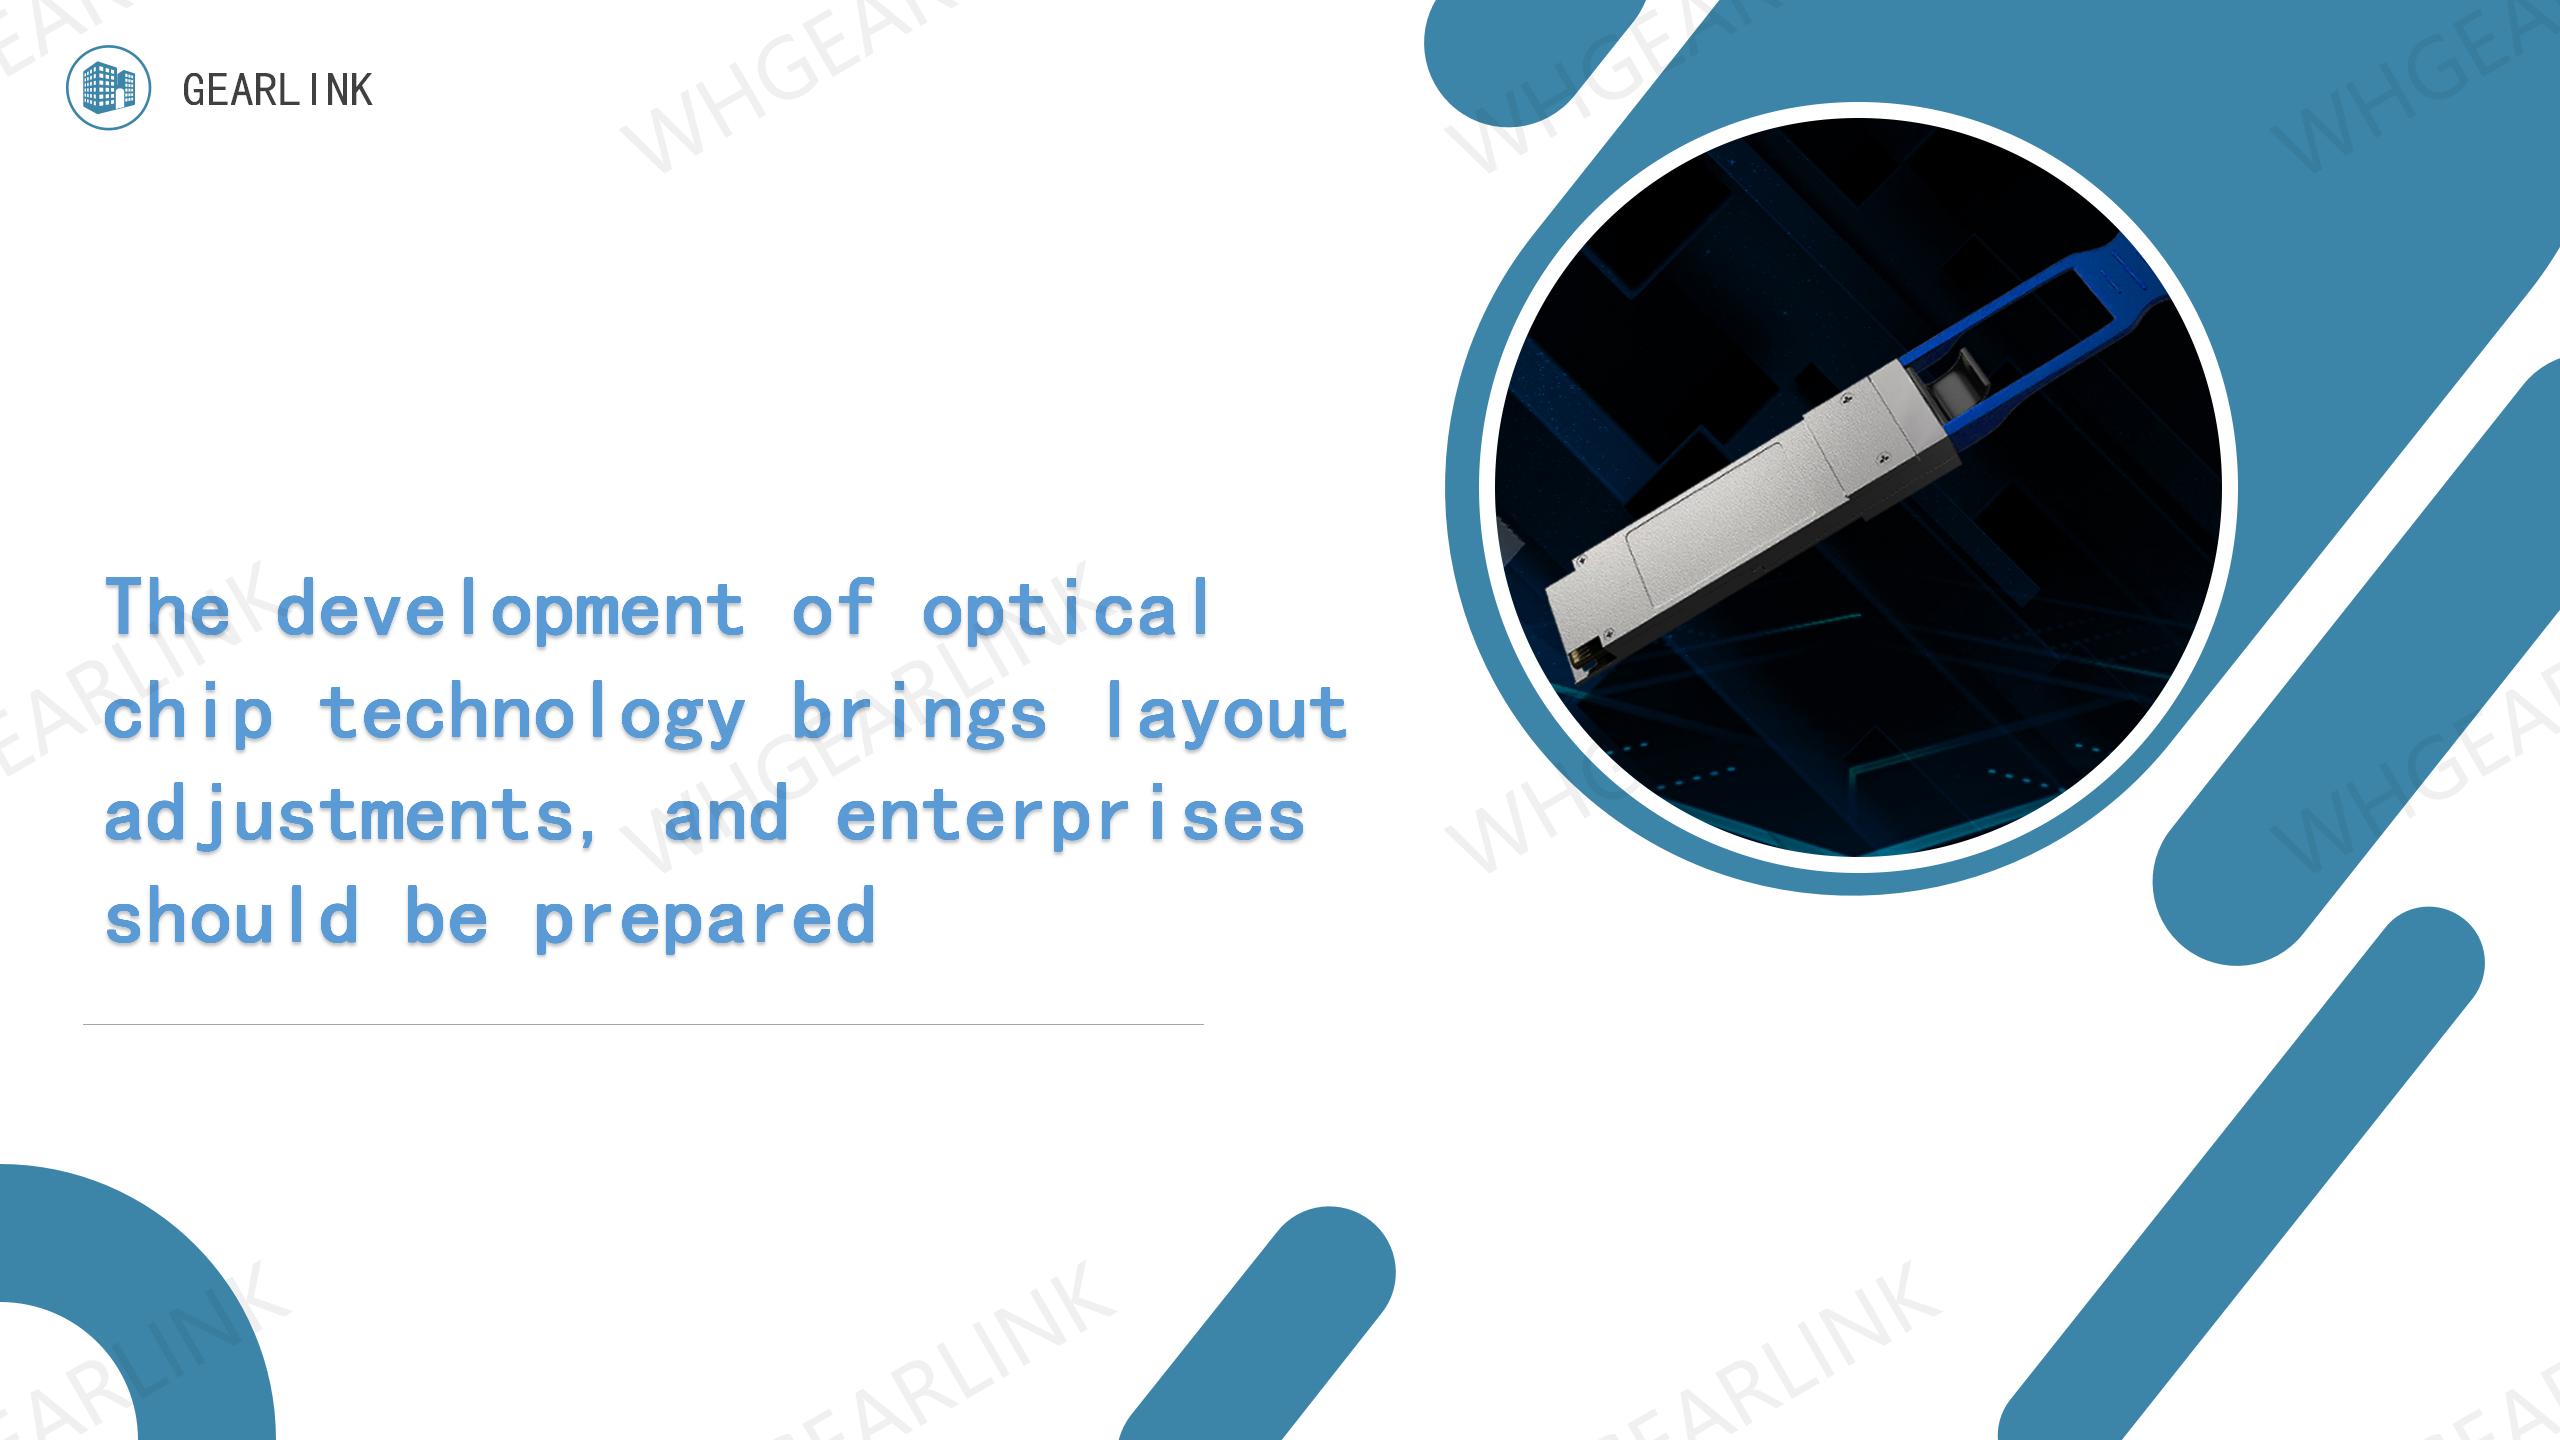 the-development-of-optical-chip-technology-brings-layout-adjustments-and-enterprises-should-be-prepared.jpg